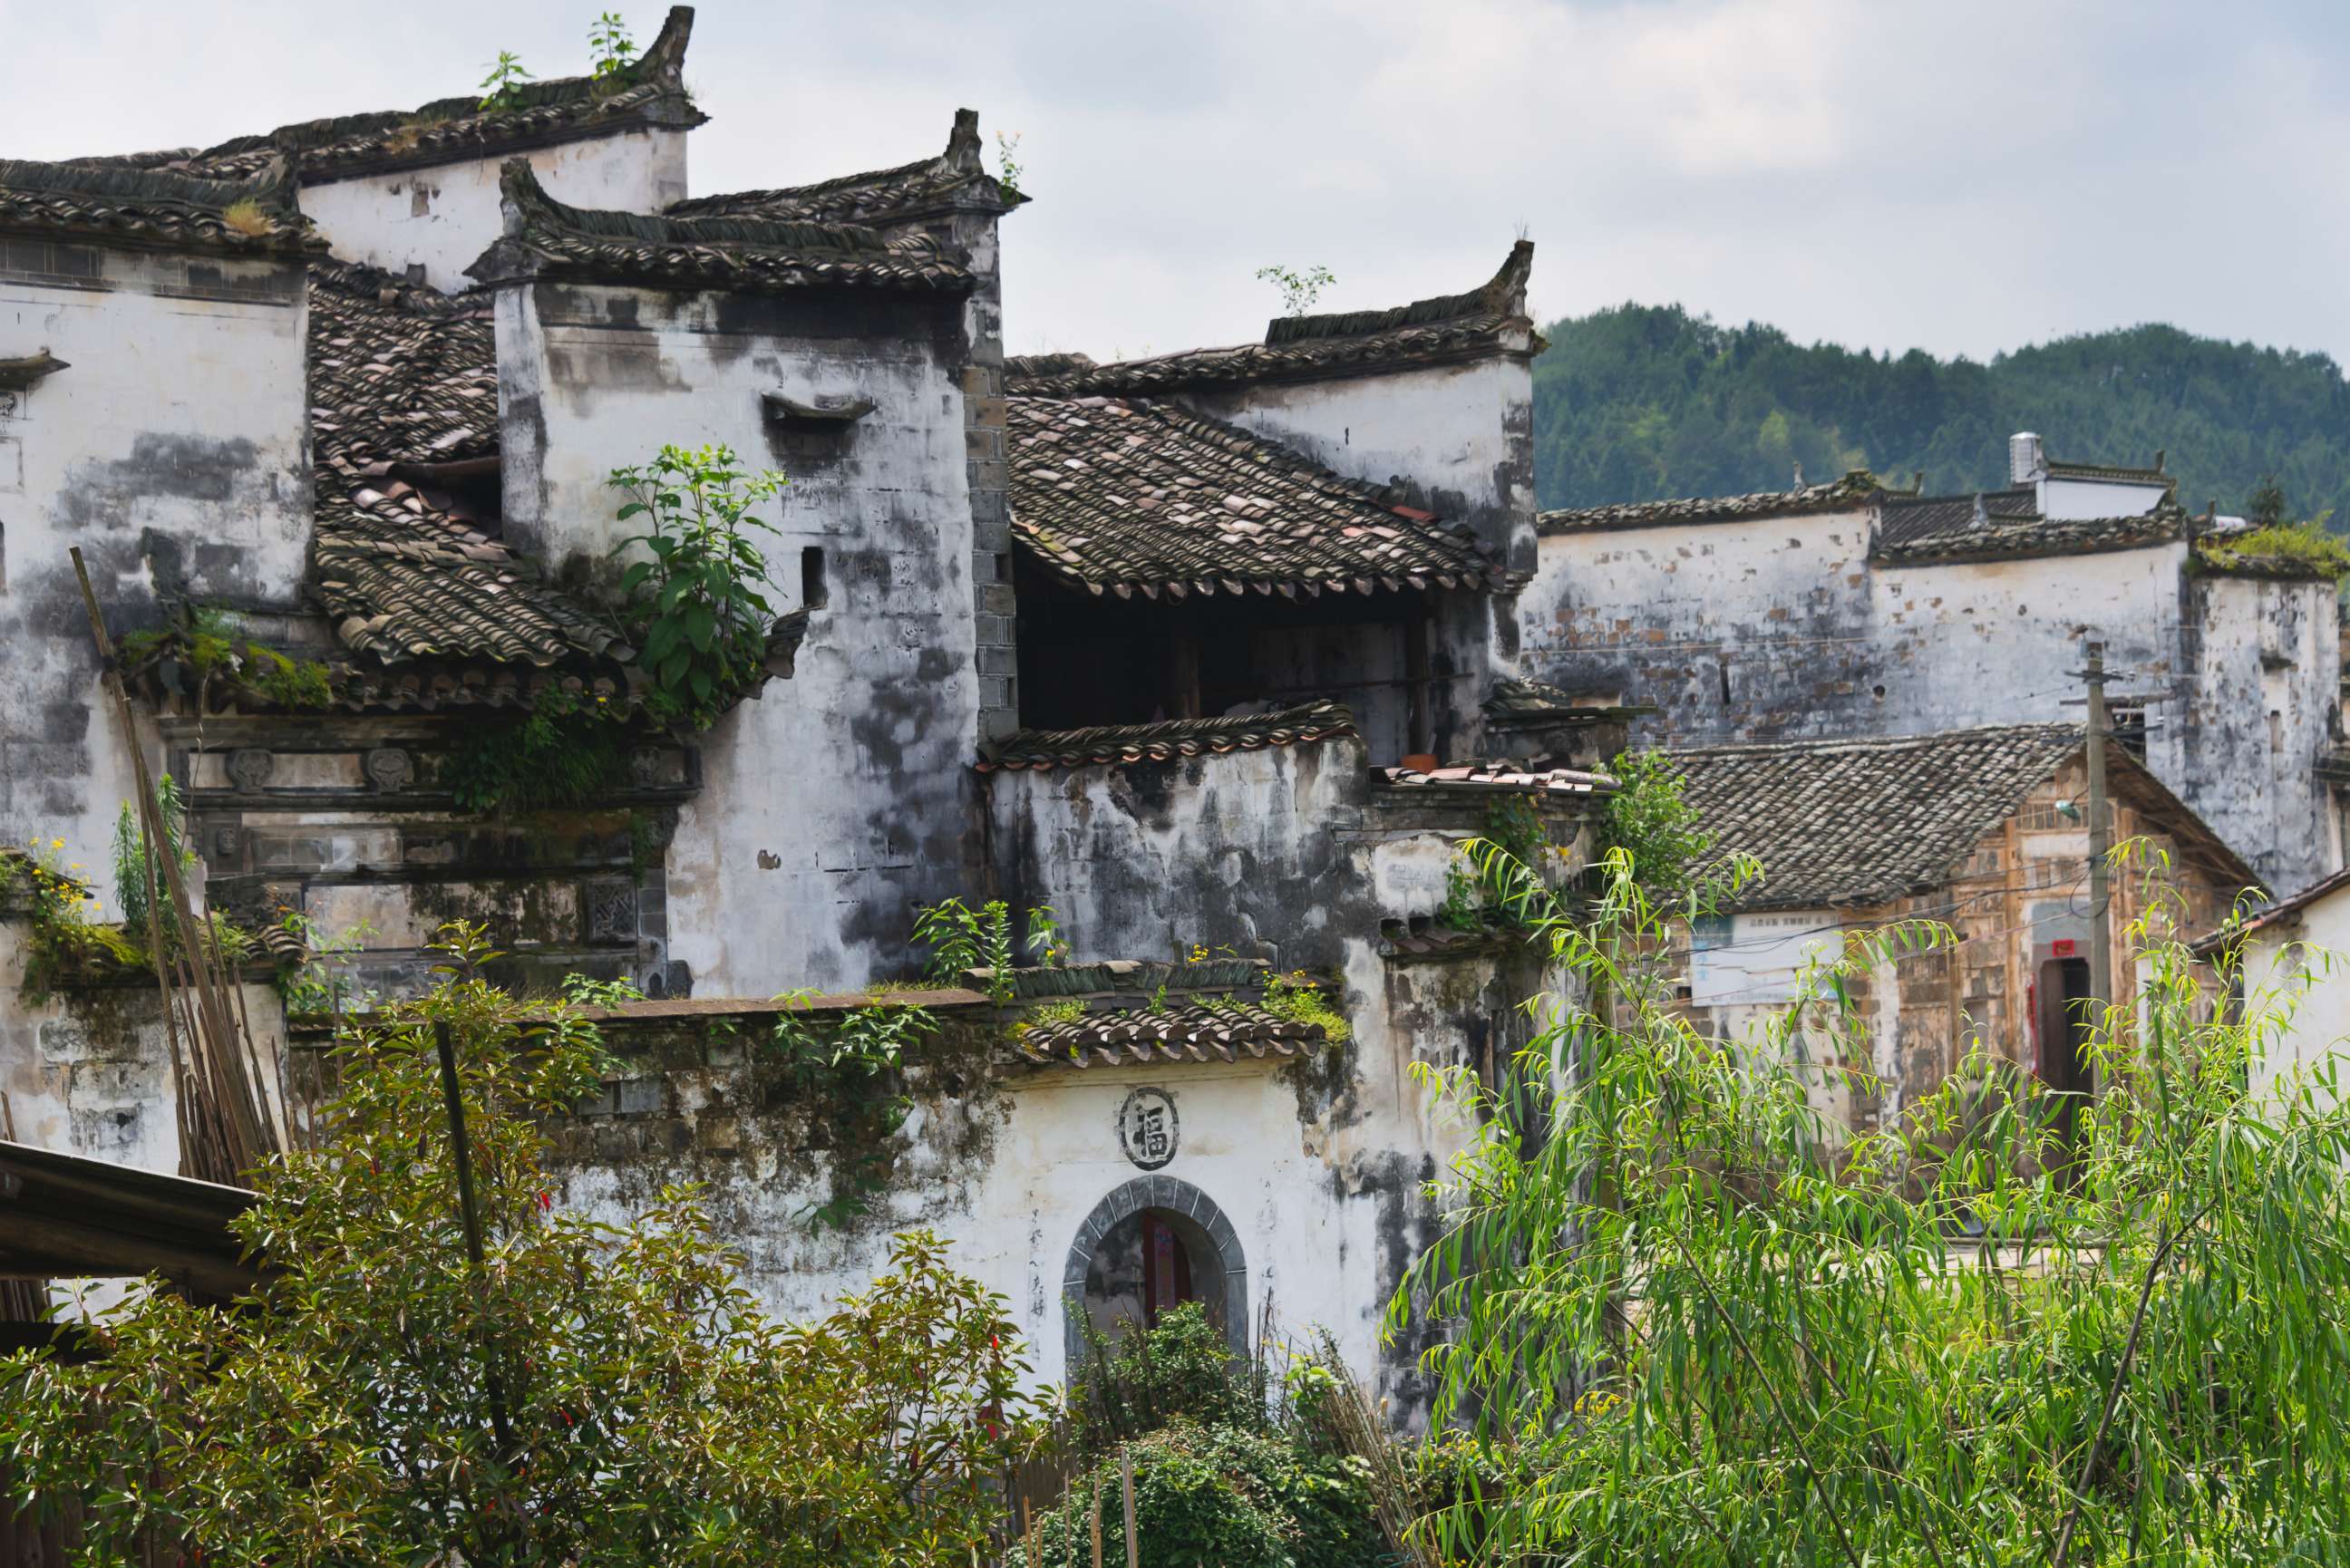 PHOTO: In this undated stock photo shows a traditional Huizhou-style house, in Jiangxi Province, China.